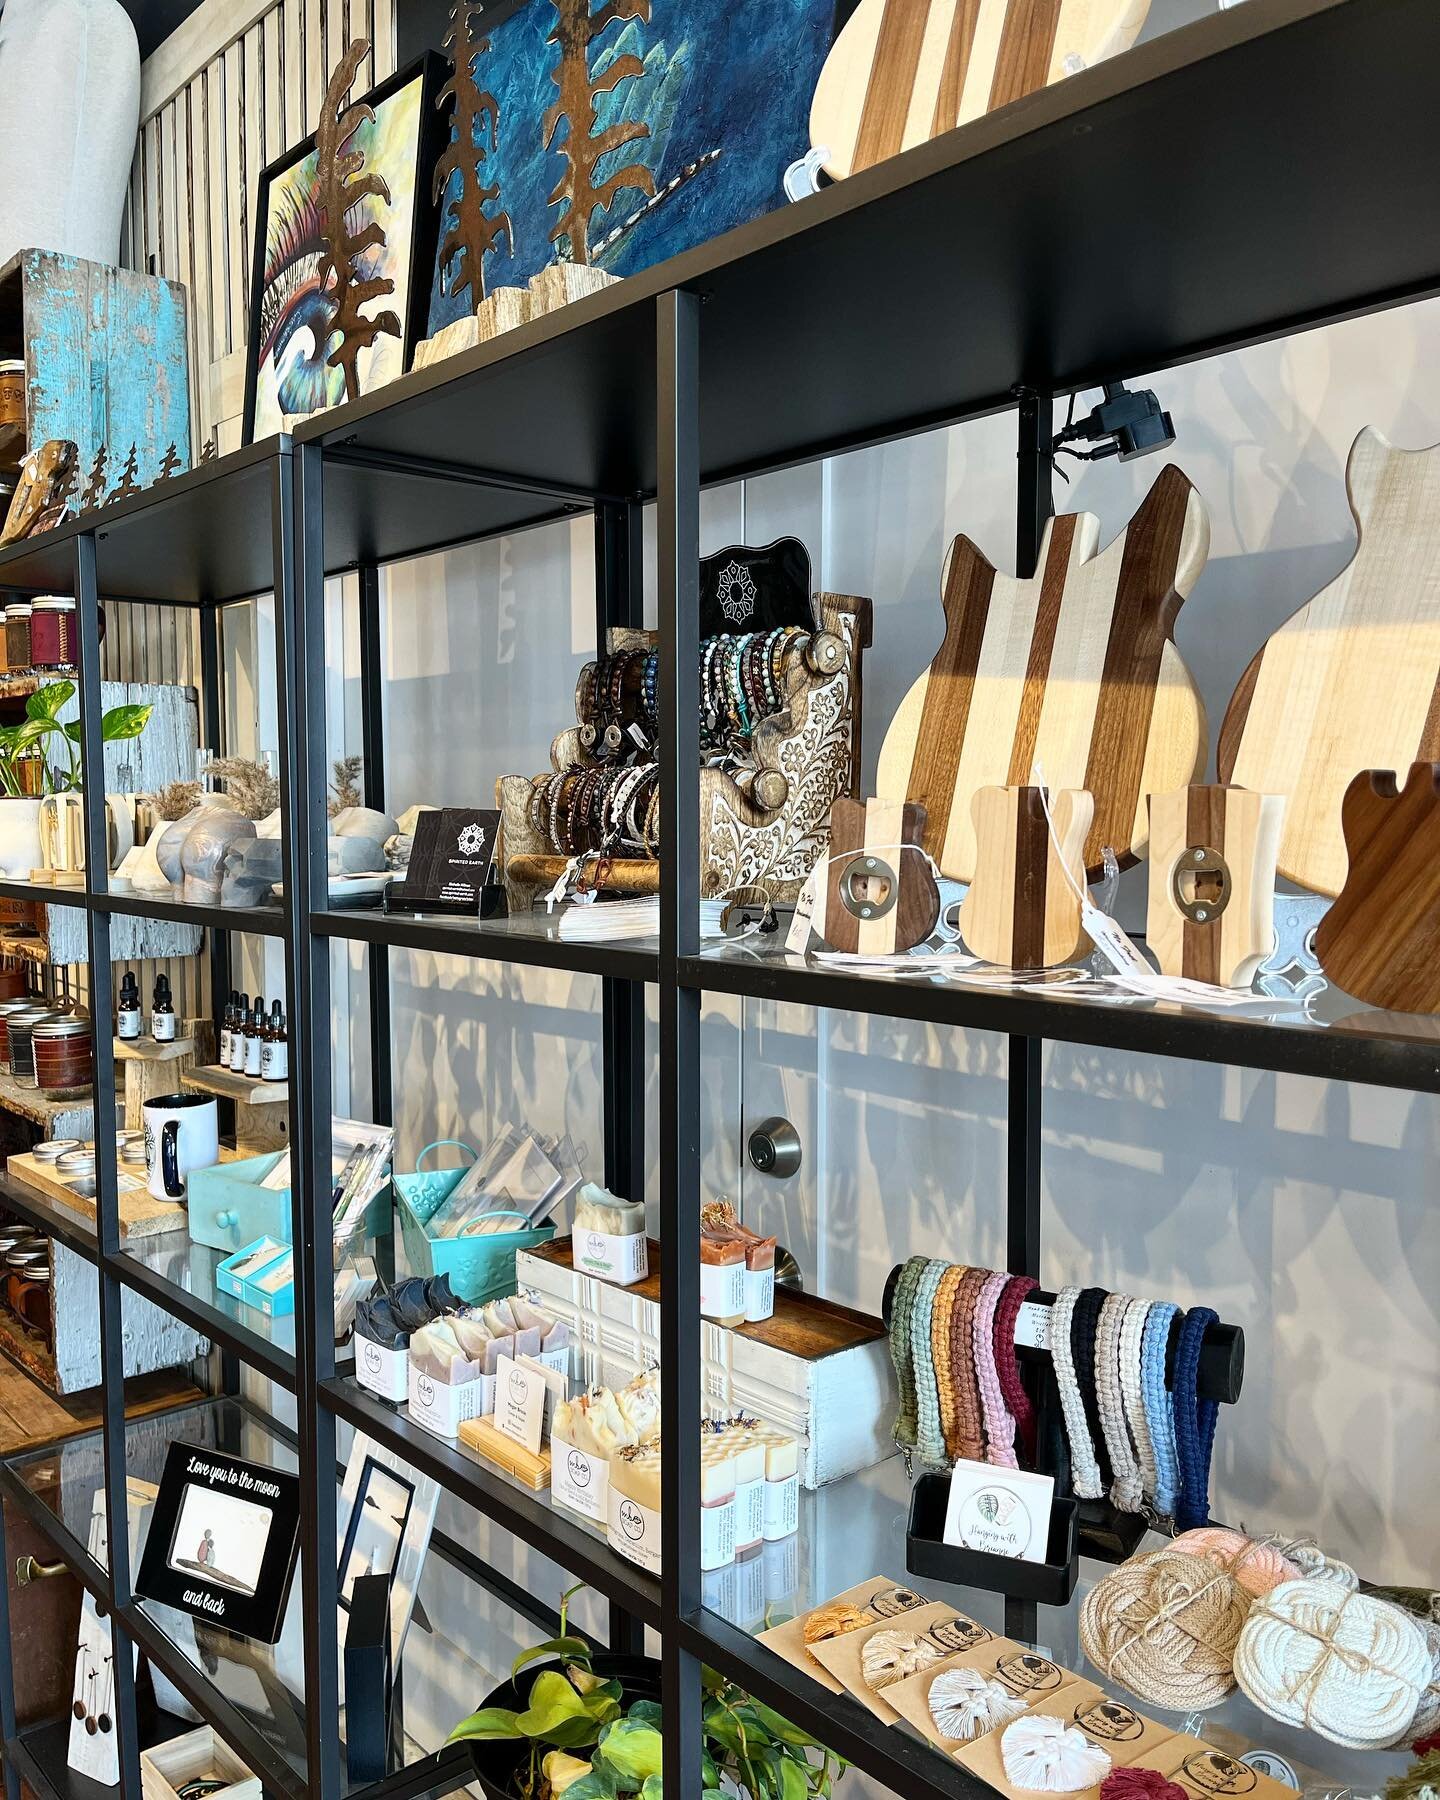 Have you seen our awesome selection of handmade goods? Not only do we have our own products available, but we also carry a variety of products made by our artisan friends! The selection is ever growing so make sure to stop by and check it out! ☕️🪴🎸